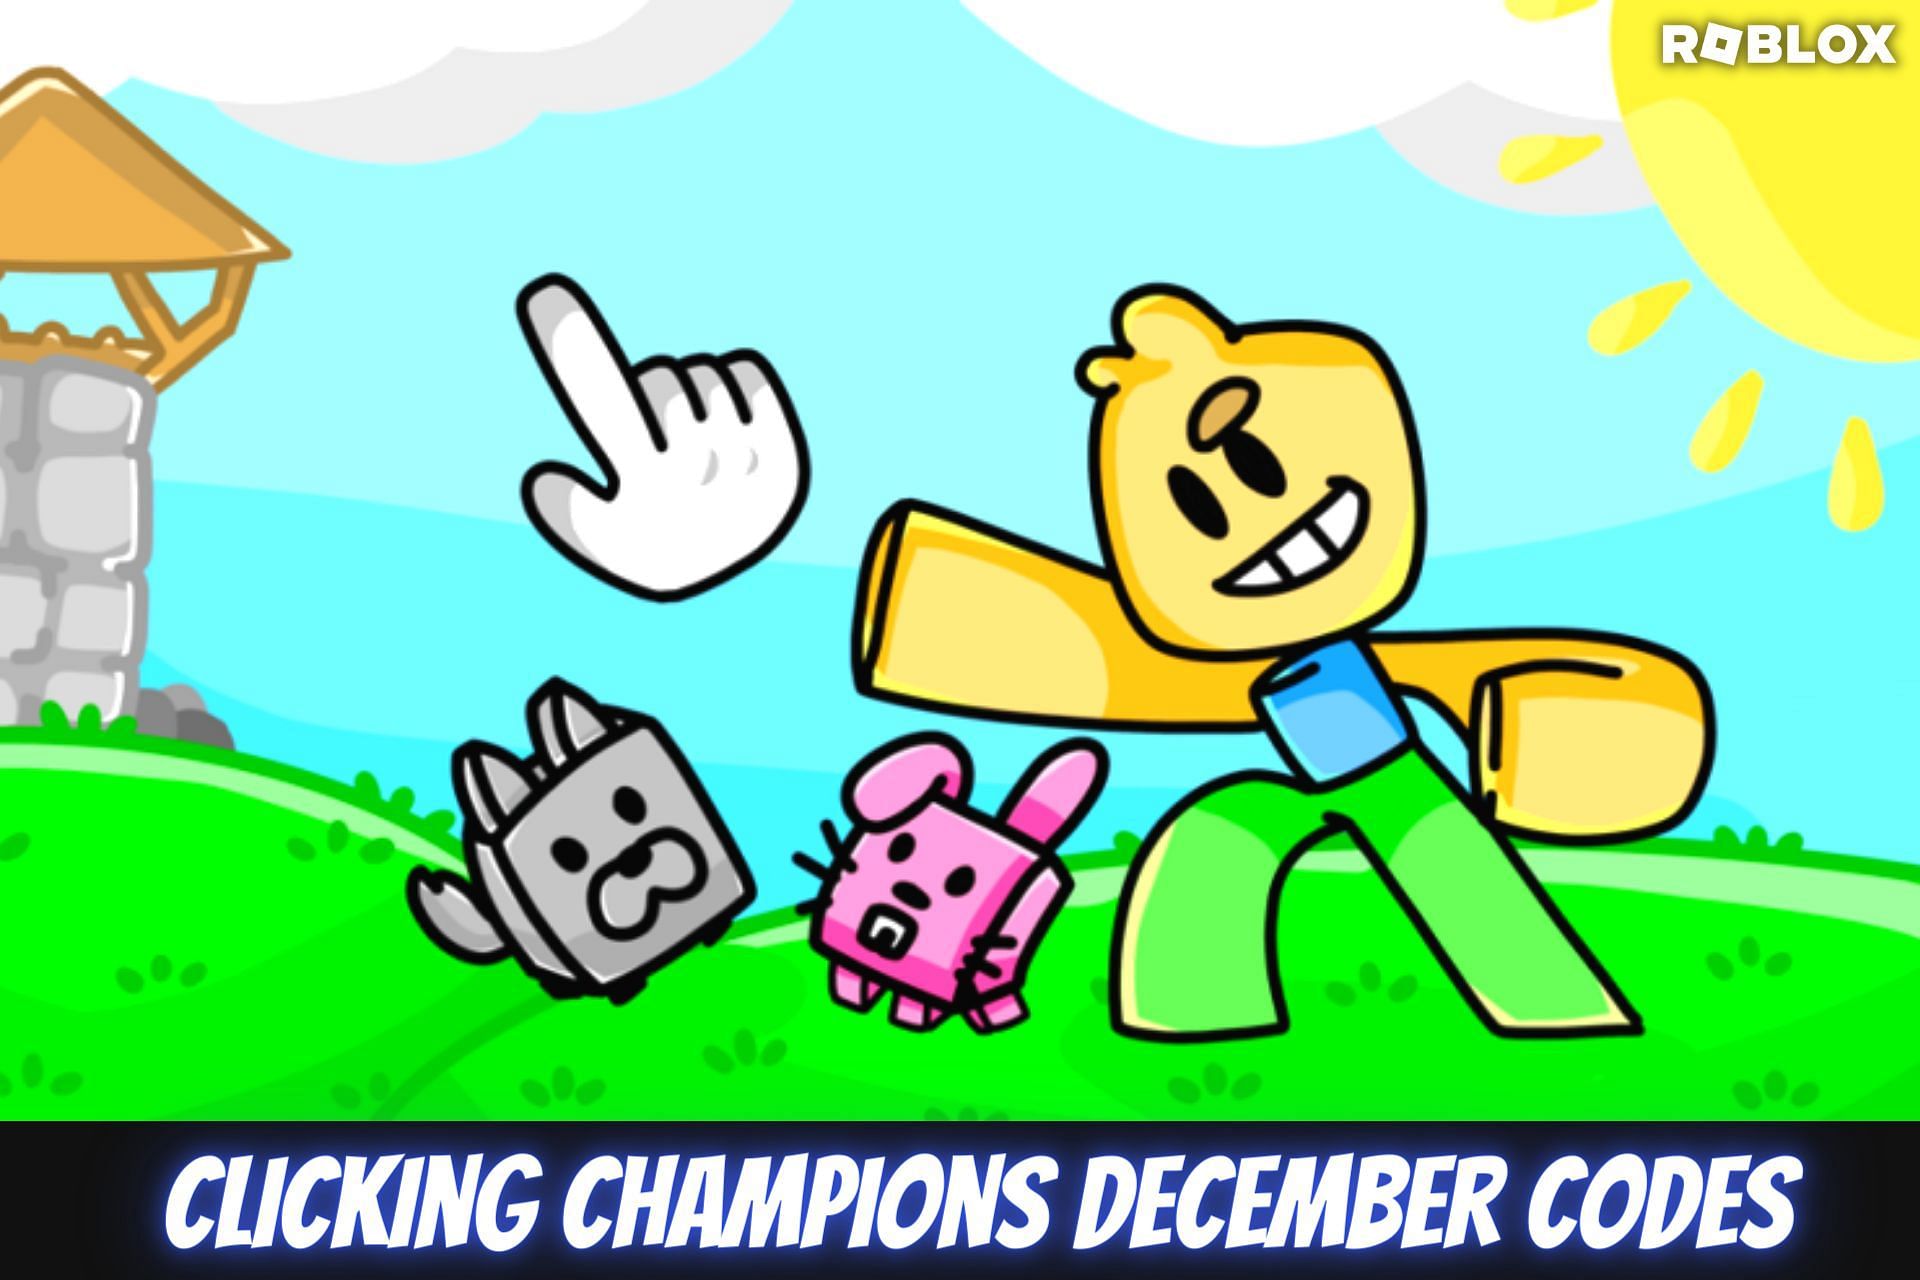 Roblox Clicking Champions December codes